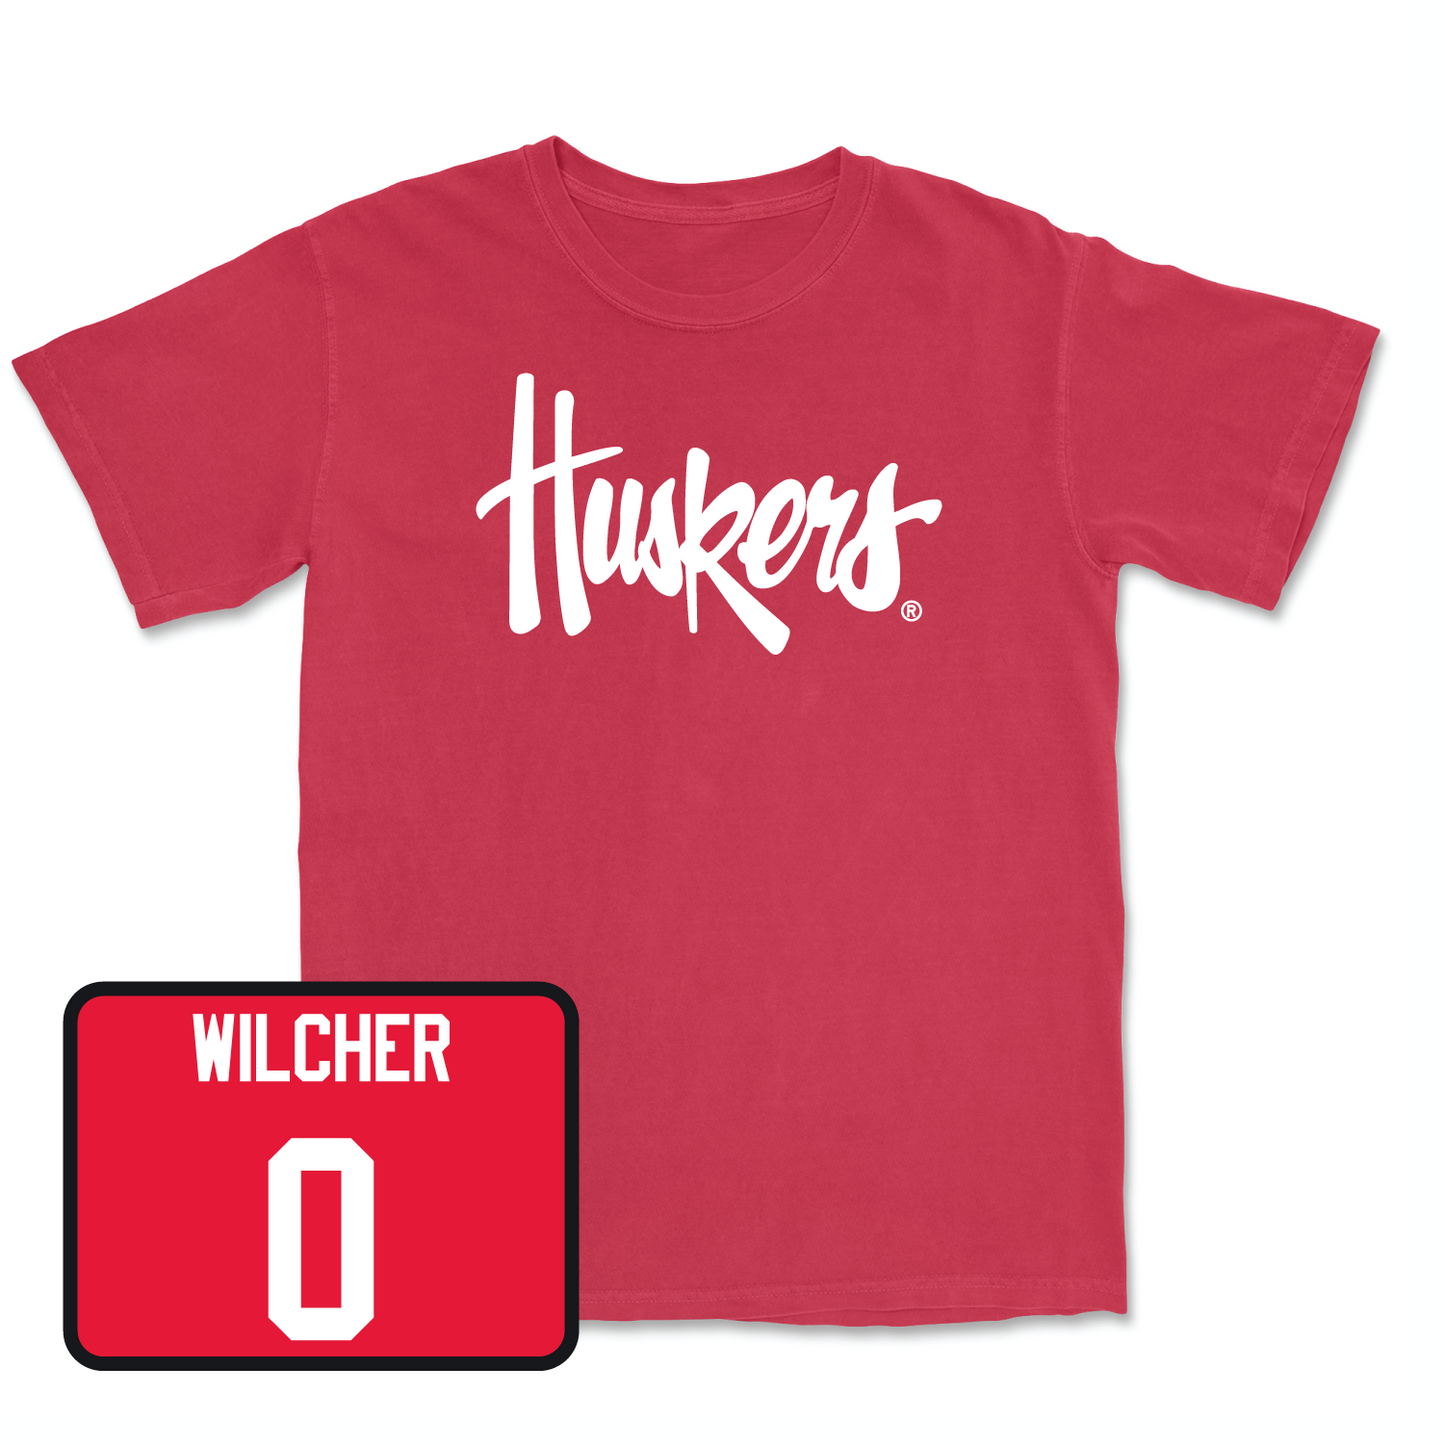 Red Men's Basketball Huskers Tee 4X-Large / C.J. Wilcher | #0